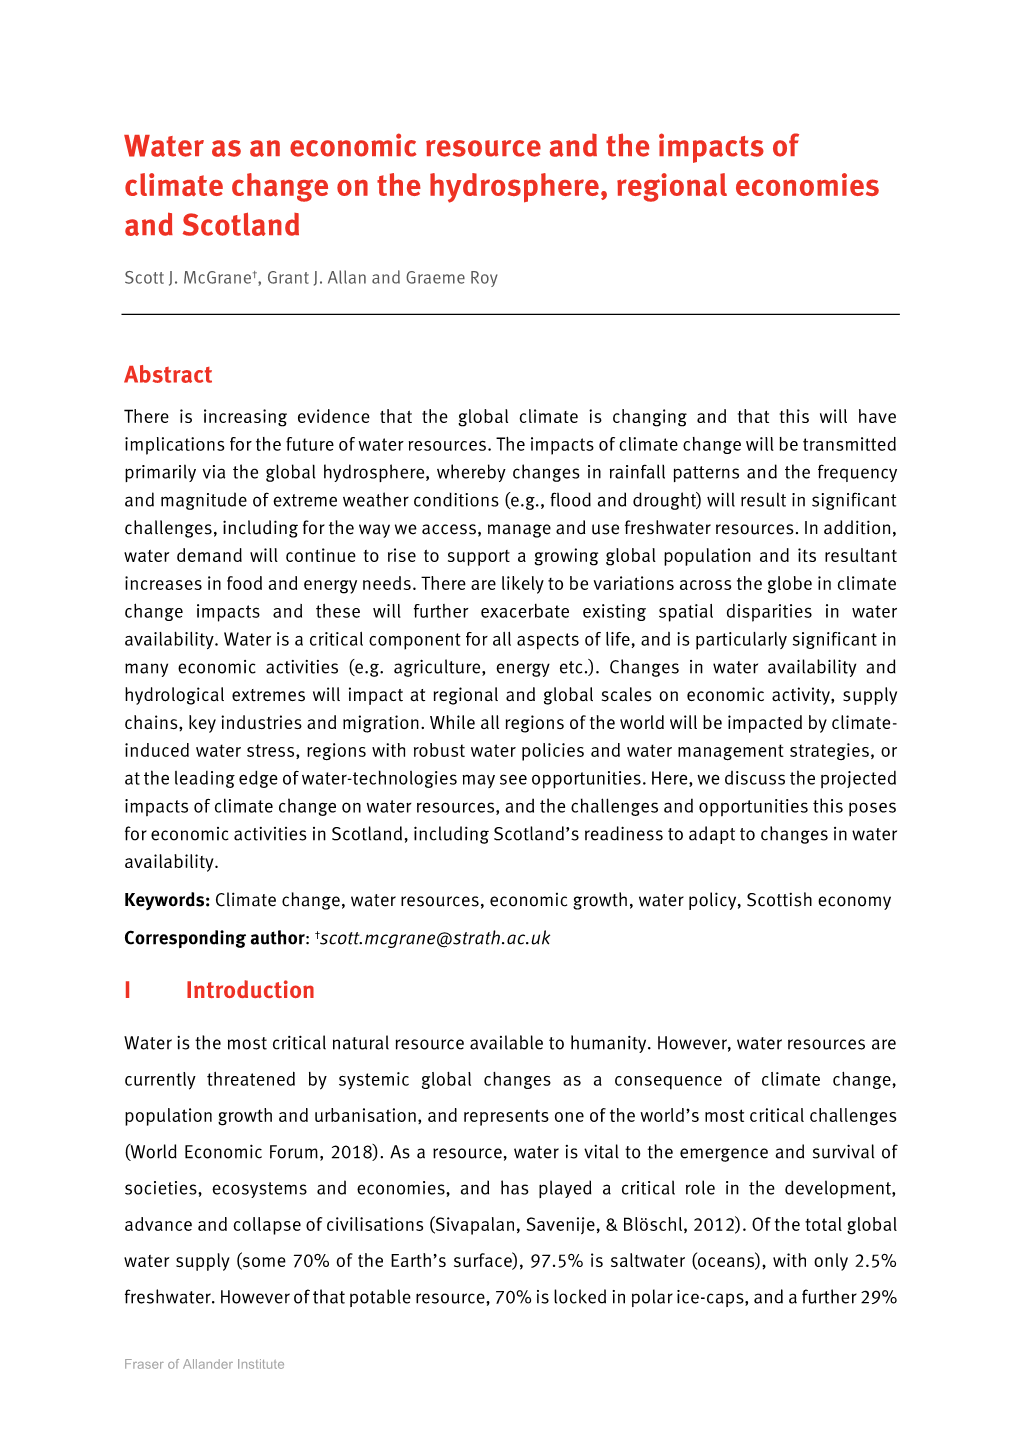 Water As an Economic Resource and the Impacts of Climate Change on the Hydrosphere, Regional Economies and Scotland